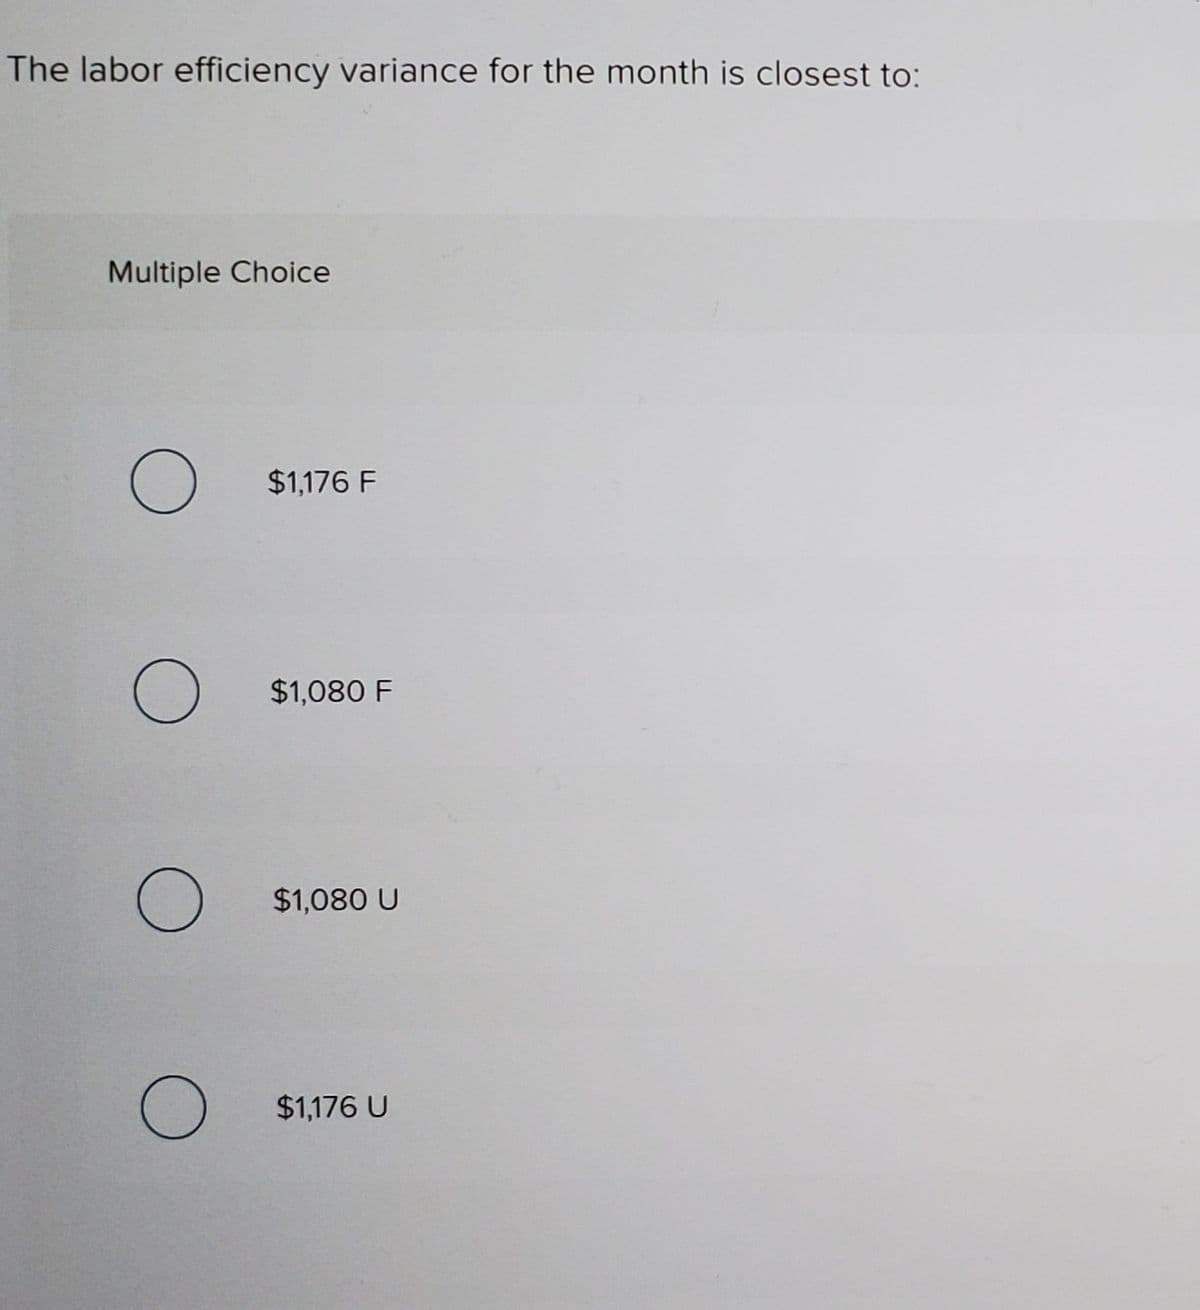 The labor efficiency variance for the month is closest to:
Multiple Choice
$1,176 F
$1,080 F
$1,080 U
$1,176 U
